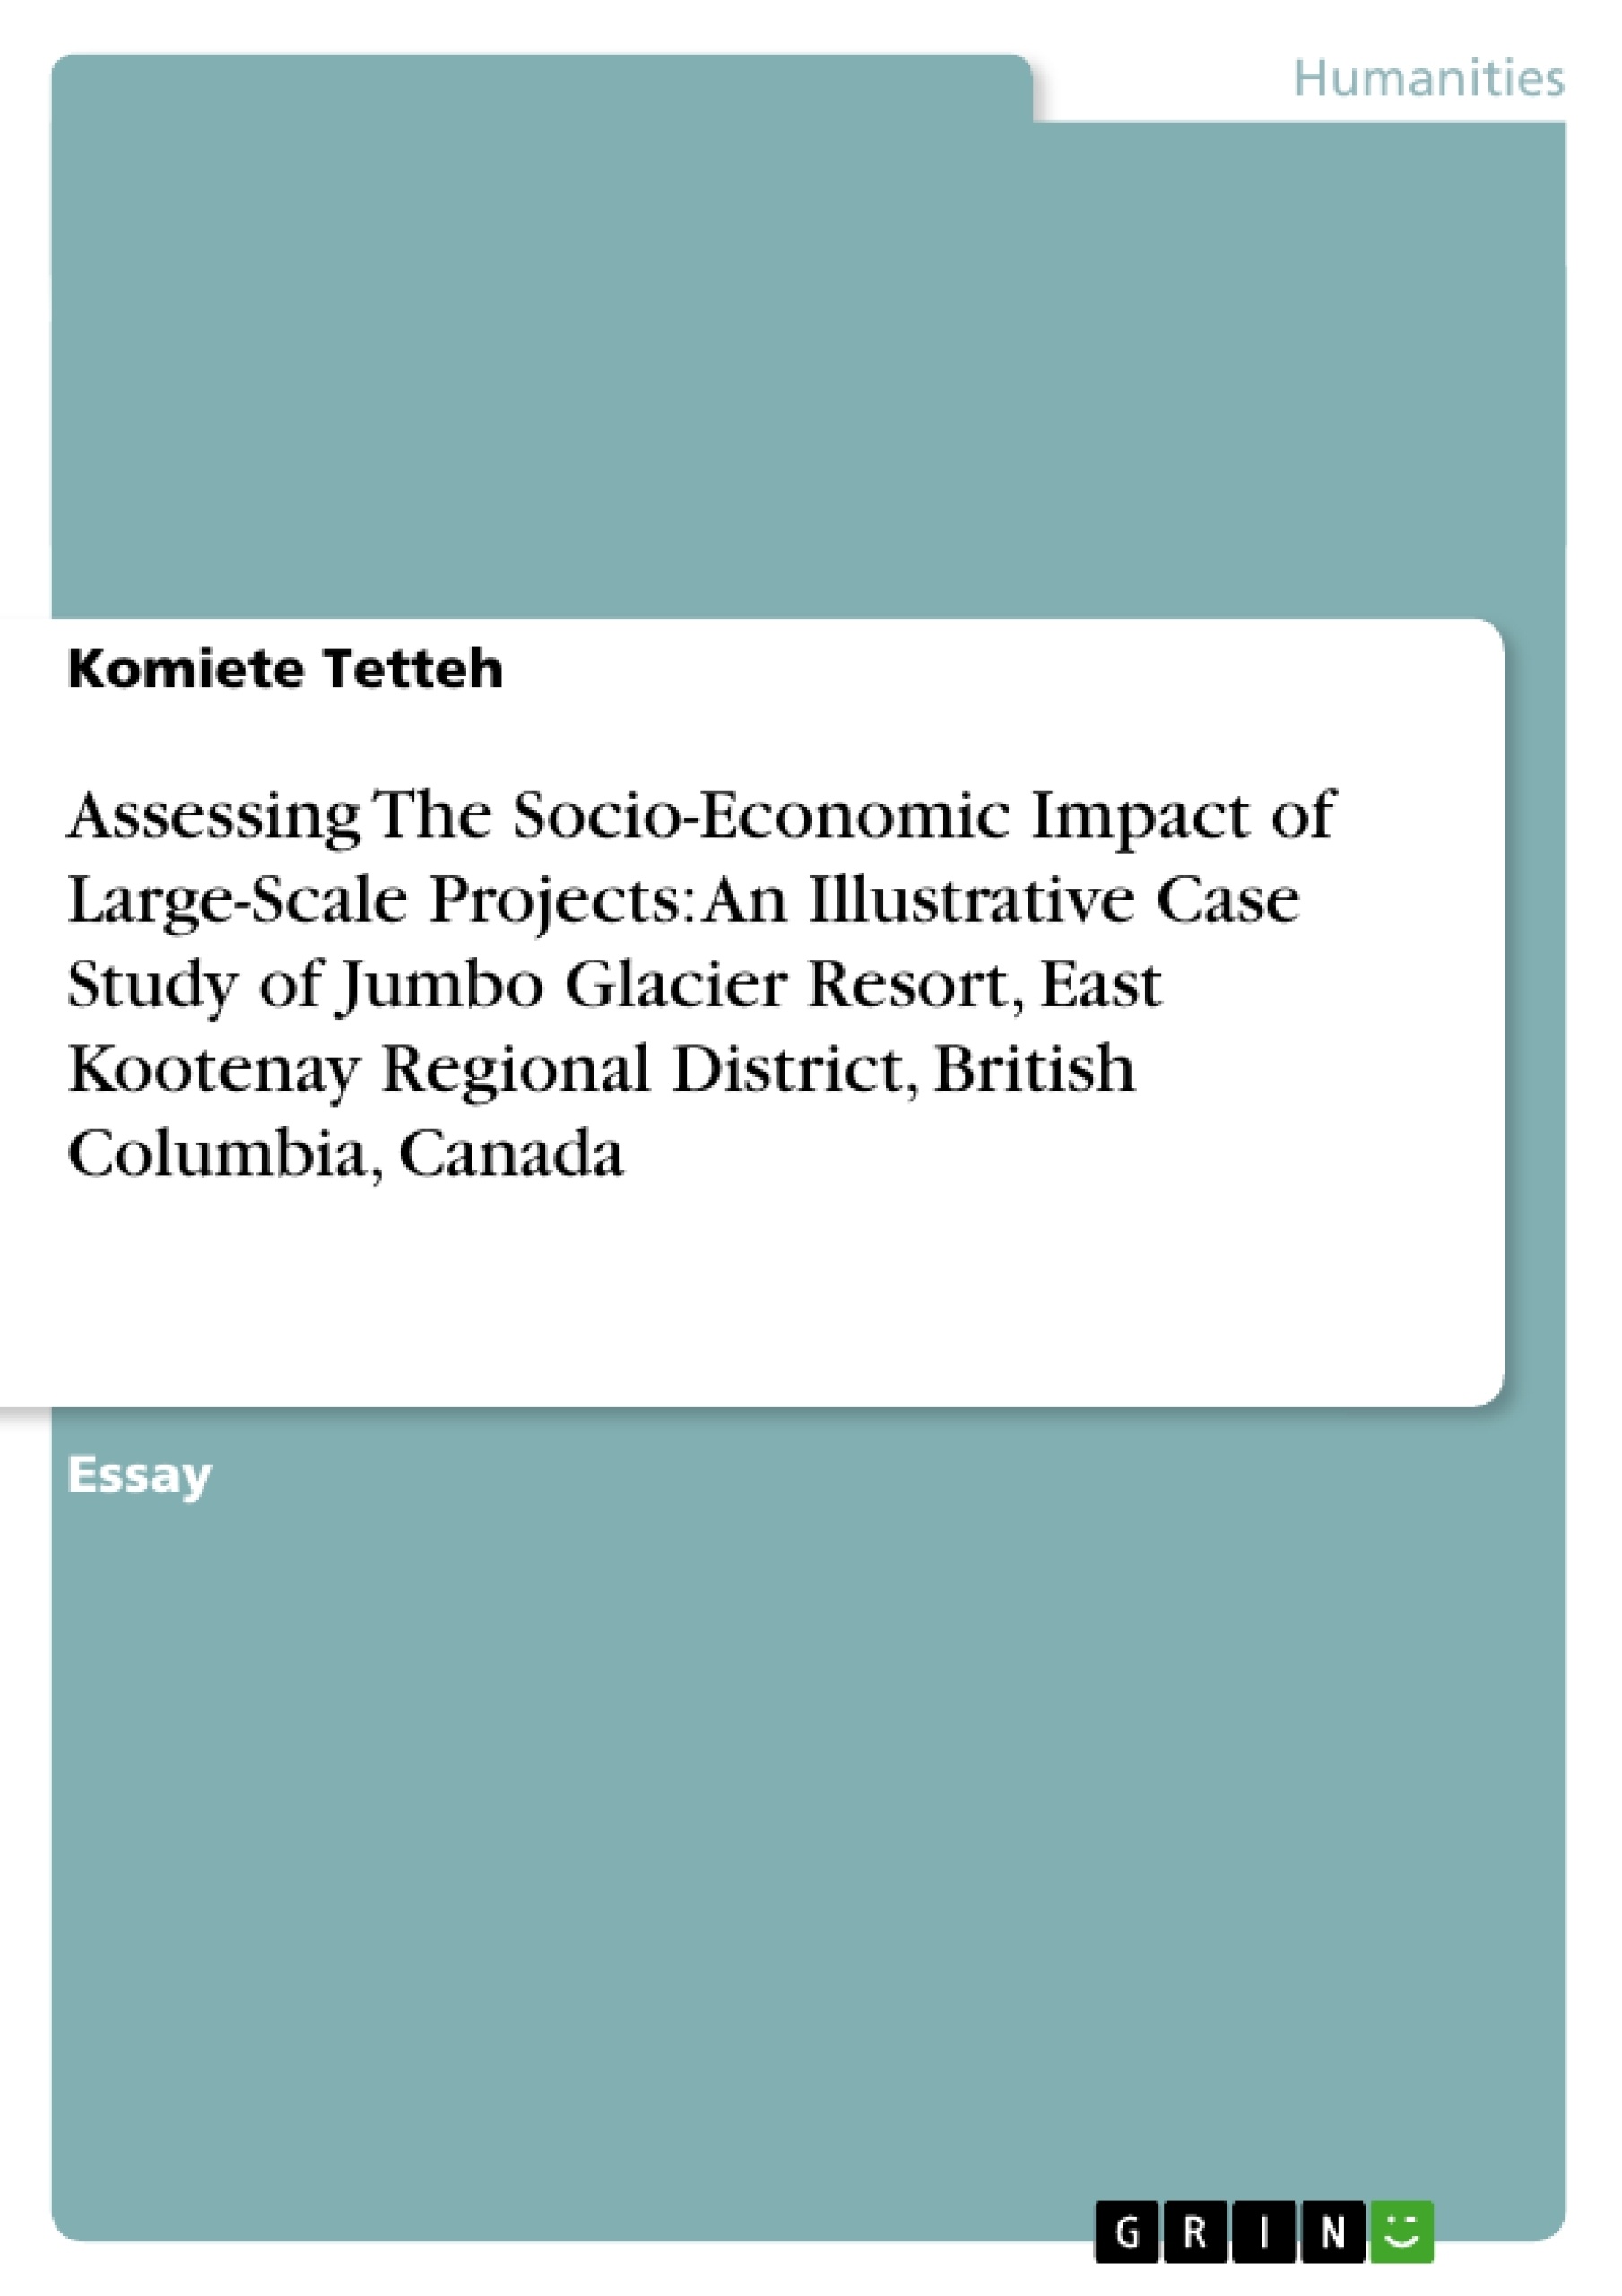 Titre: Assessing The Socio-Economic Impact of Large-Scale Projects: An Illustrative Case Study of Jumbo Glacier Resort, East Kootenay Regional District, British Columbia, Canada